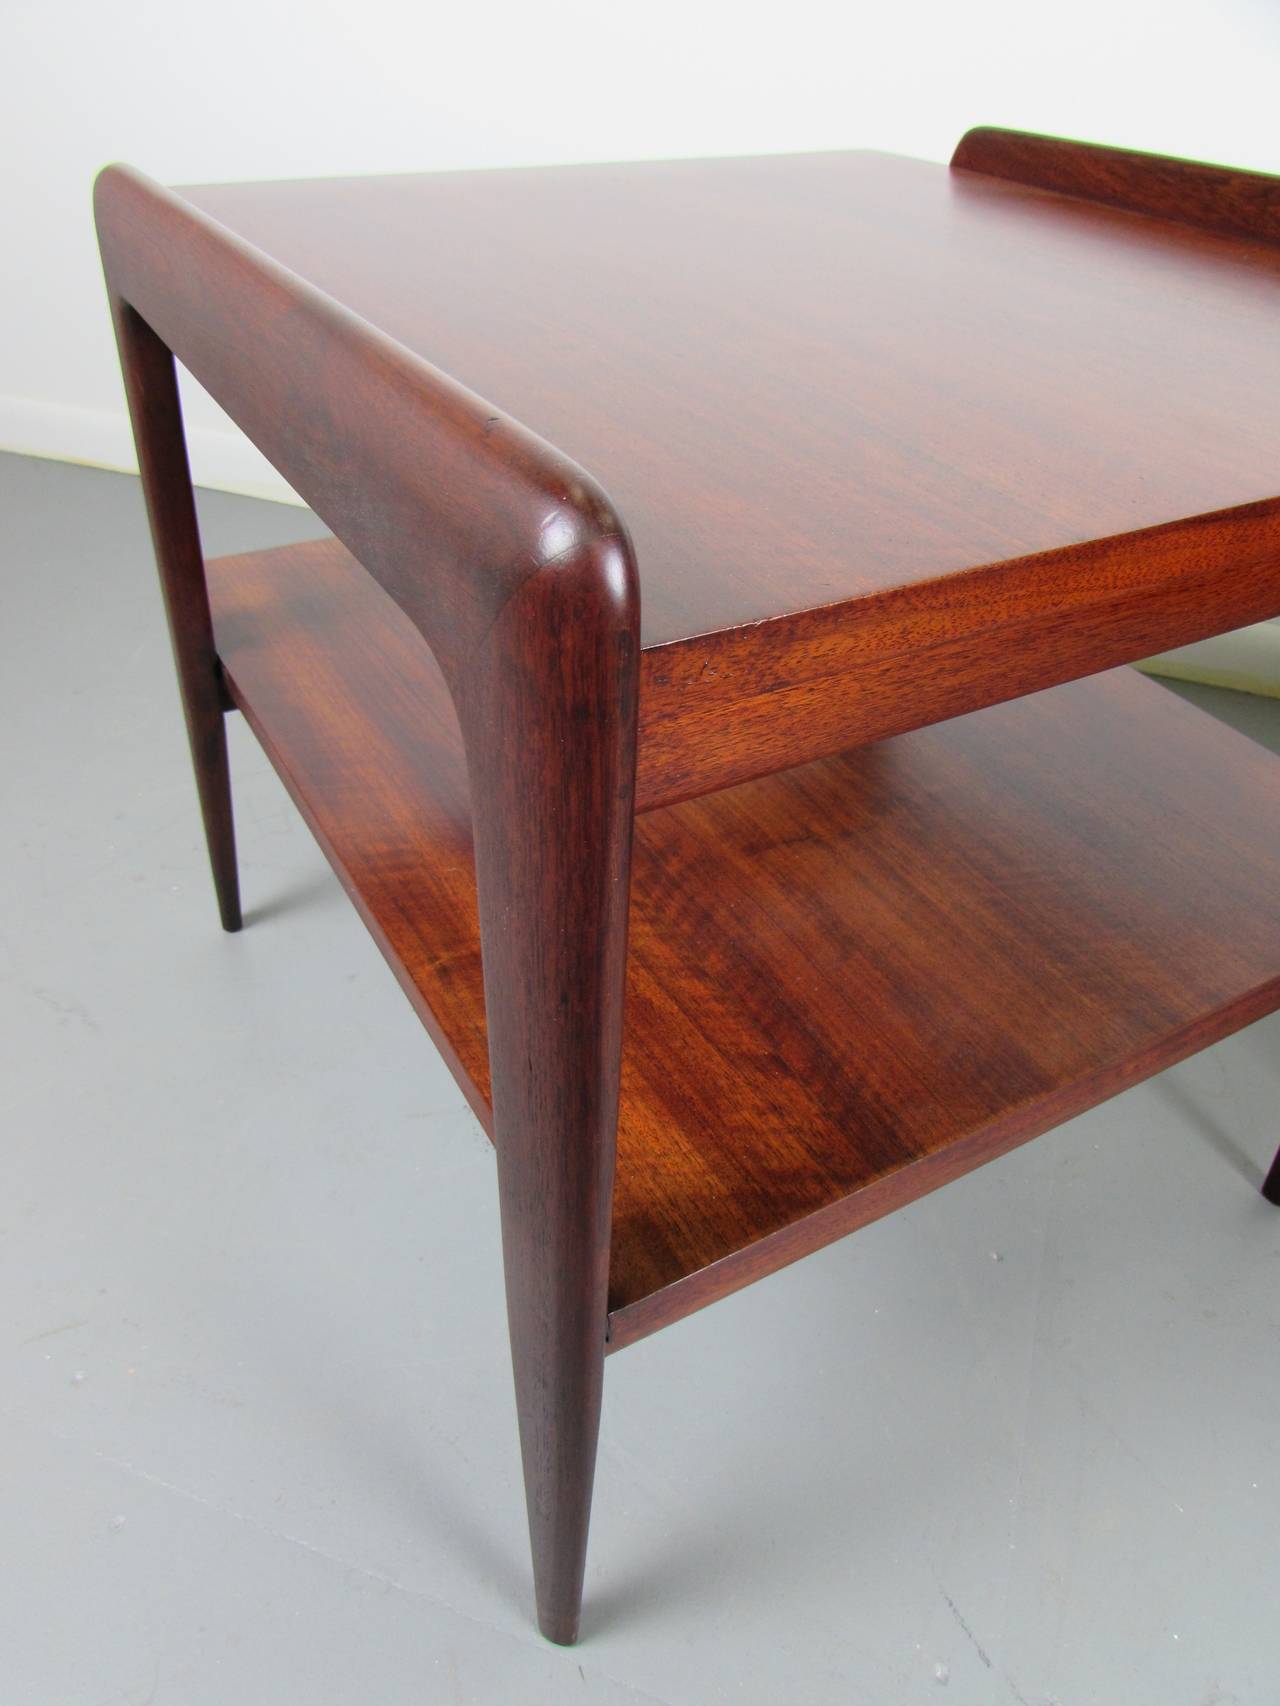 Mahogany Rare and Wicked Pair of End Tables by M. Singer & Sons, Attributed to Gio Ponti